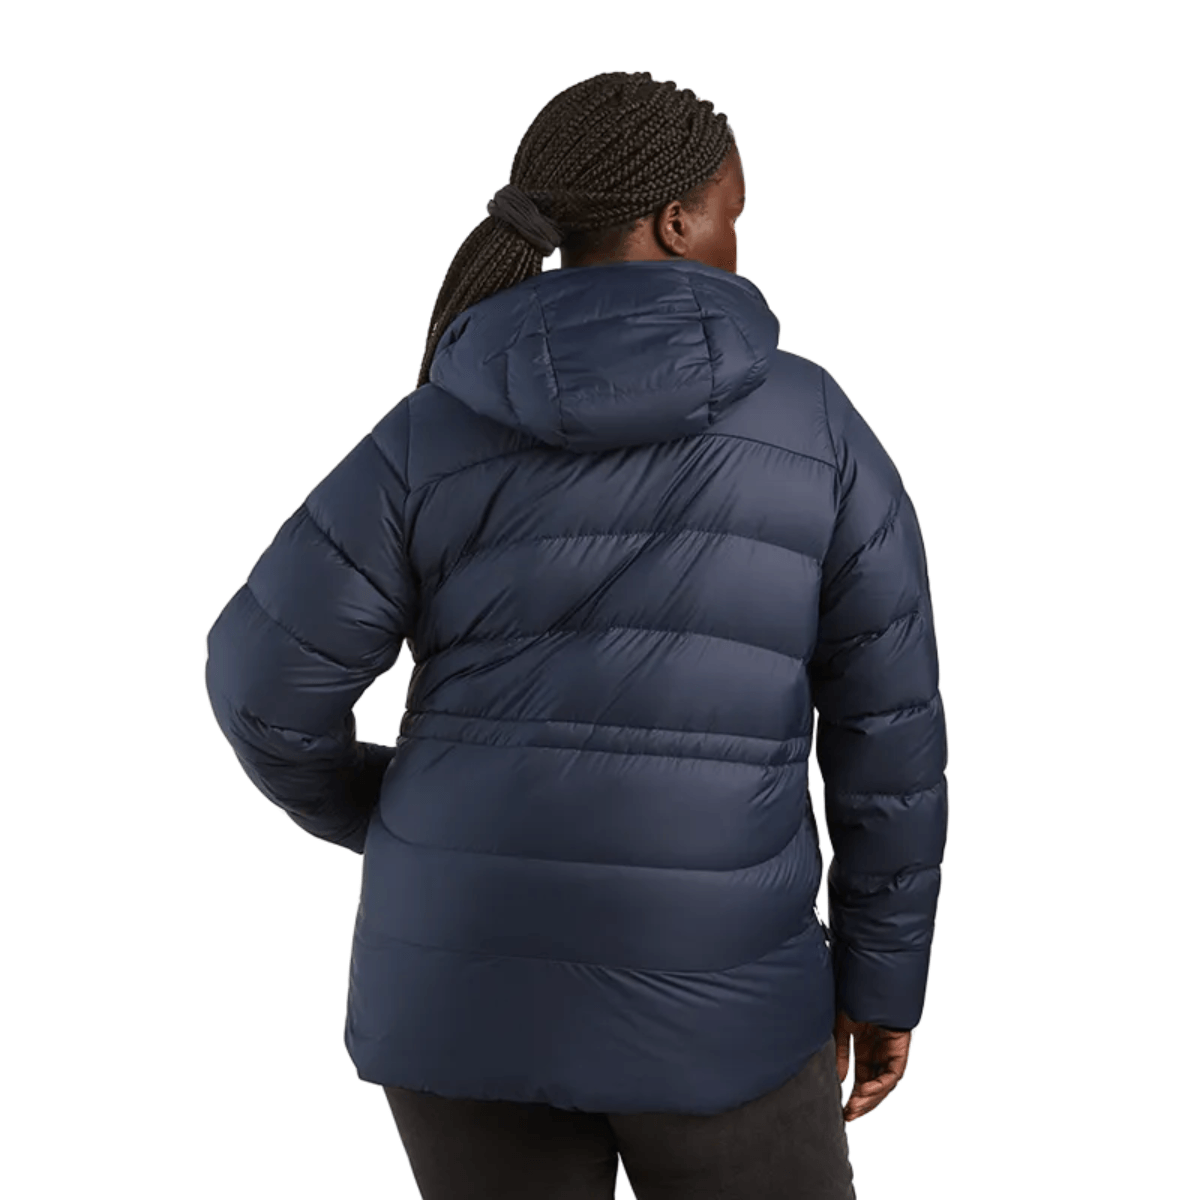 Outdoor Research Coldfront Down Hooded Jacket - Women's - Als.com